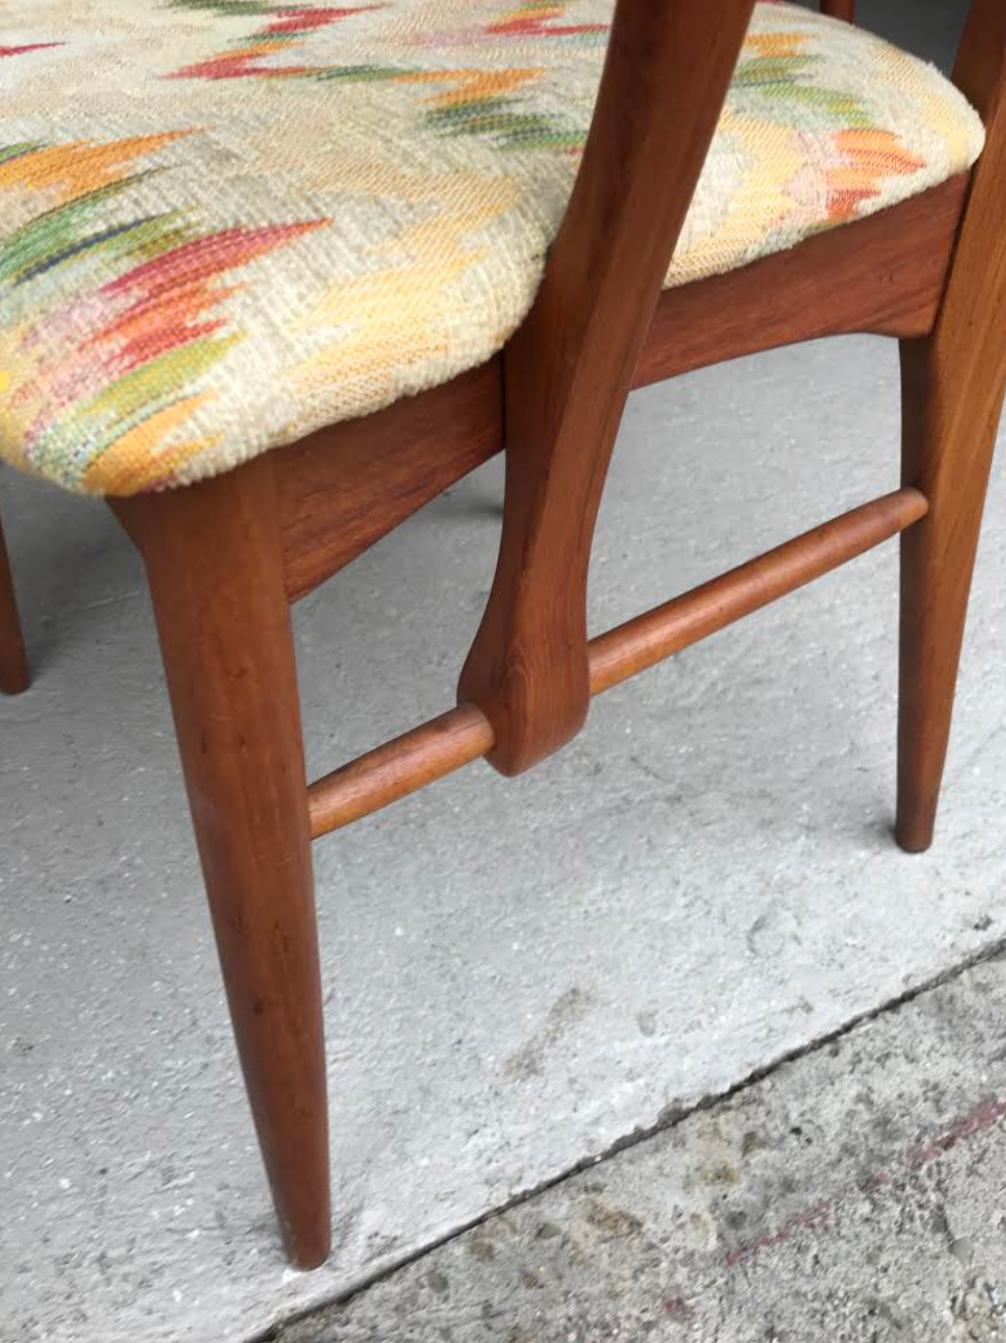 Set of 6 Niels Koefoed for Koefoeds Hornslet teak dining chairs. 2 armchairs with 4 side chairs. All in great condition with minor wear. Original finish, freshly oiled. Upholstery is in good condition too, with no issues. Measures: 21 1/2